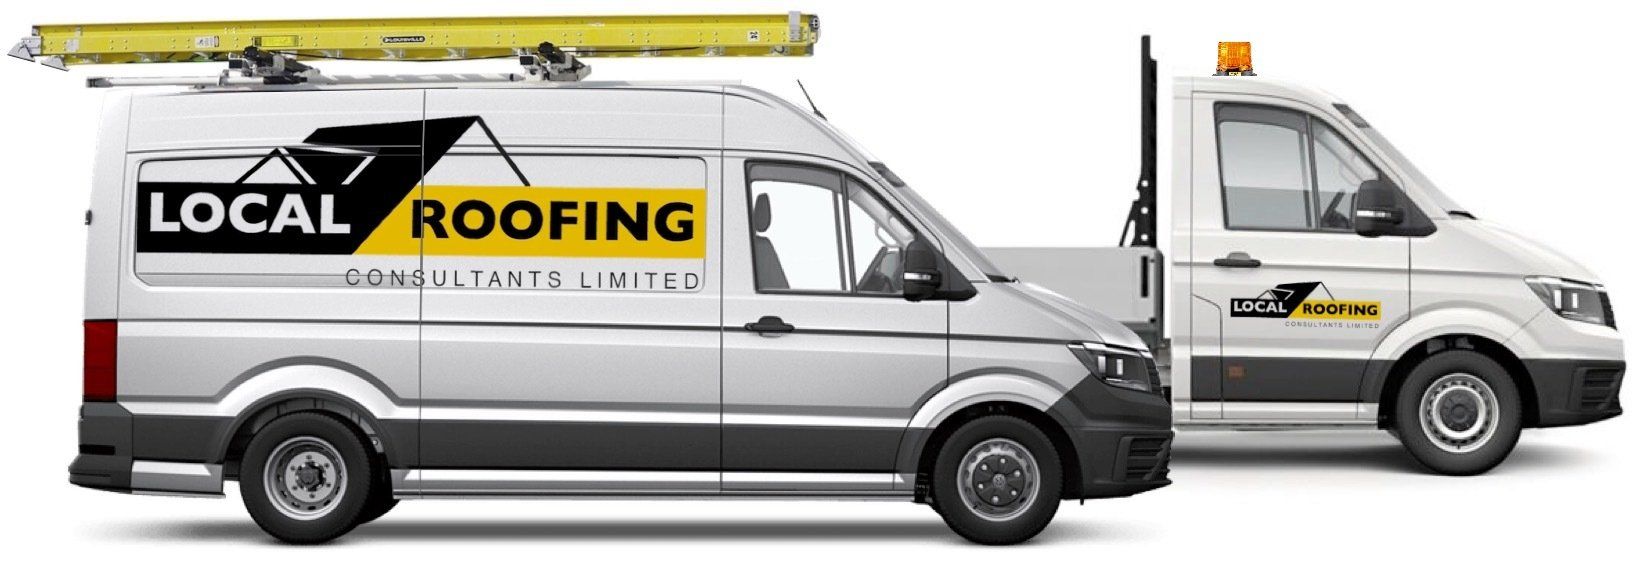 Local Roofing Consultants Limited work in Ealing and throughout the London area